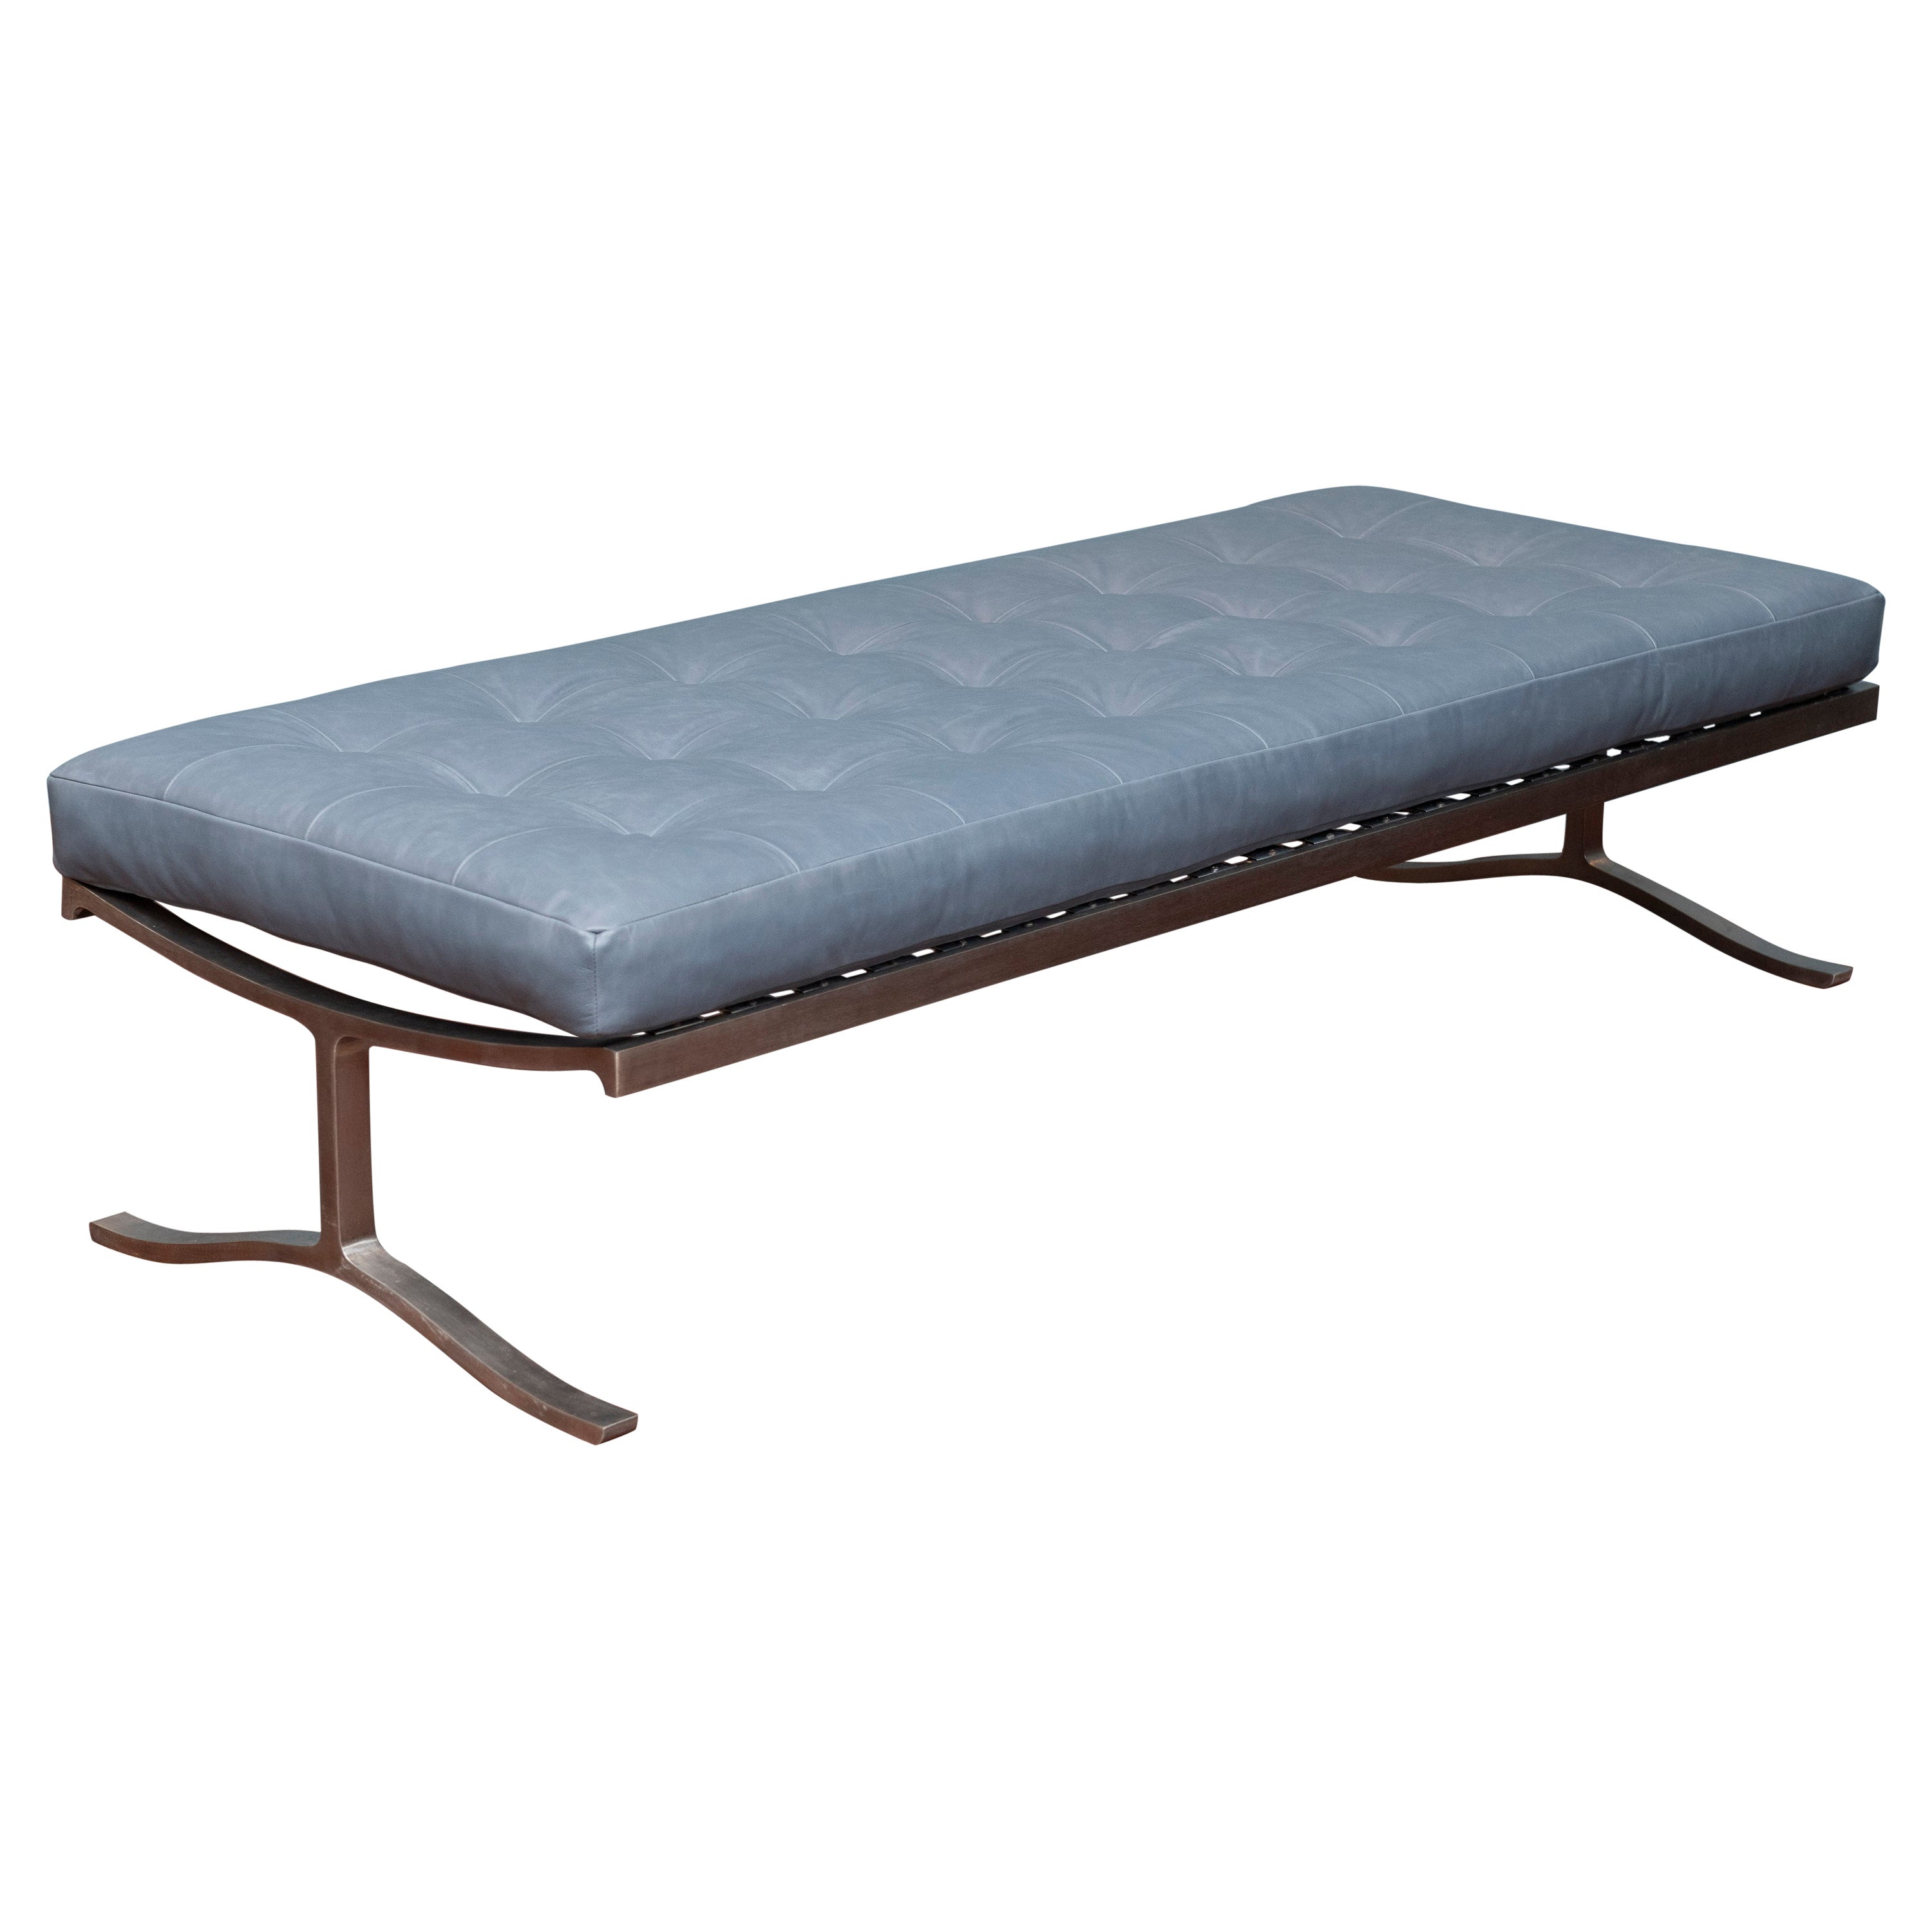 Nicos Zographos Stainless Steel Bench For Sale